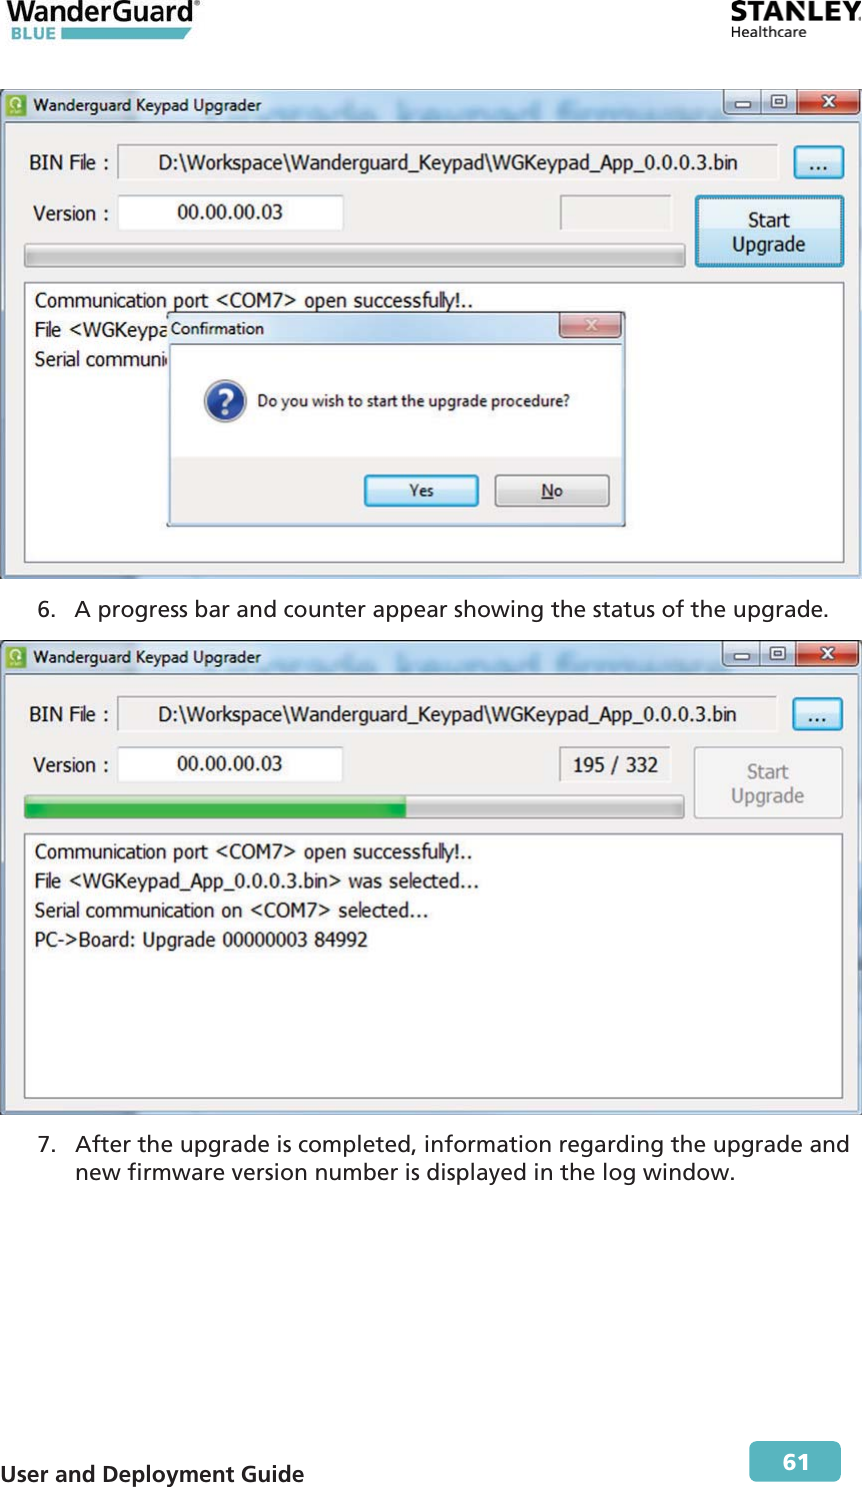  User and Deployment Guide        61  6. A progress bar and counter appear showing the status of the upgrade.  7. After the upgrade is completed, information regarding the upgrade and new firmware version number is displayed in the log window. 